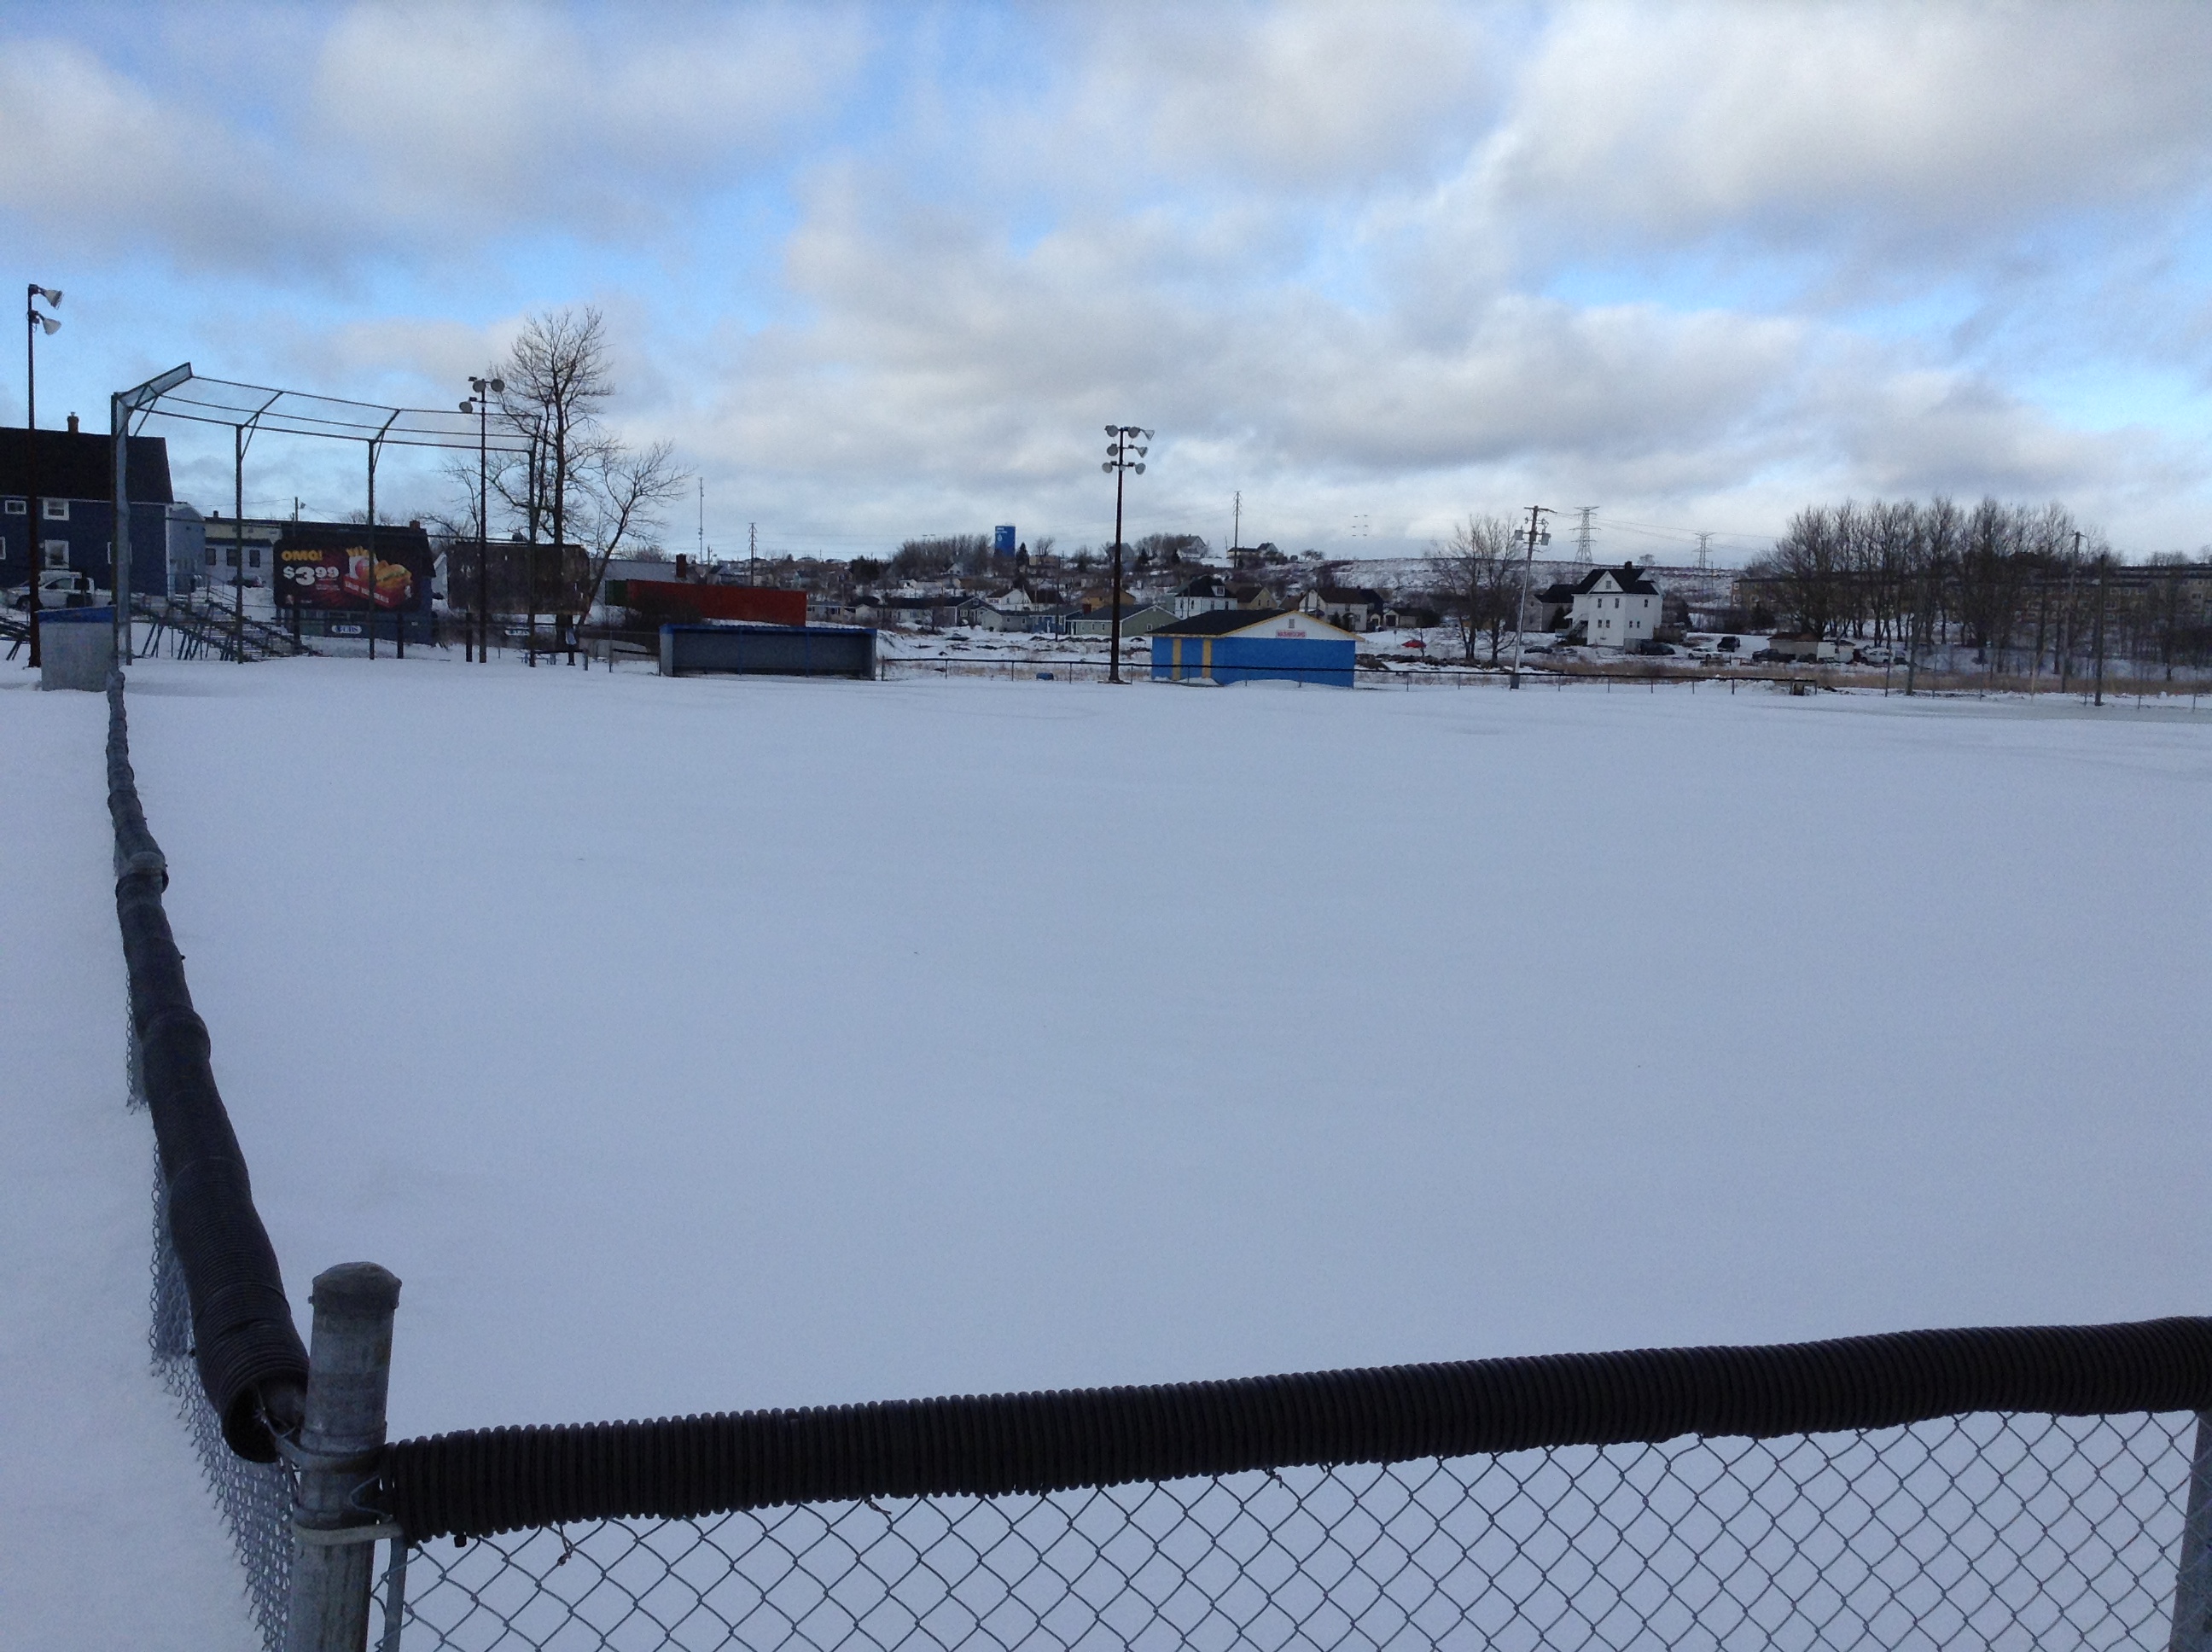 Whitney Pier Ballfield is Covered with snow and No Ballgames and the Ballfield looks Deserted during the Winter Time.